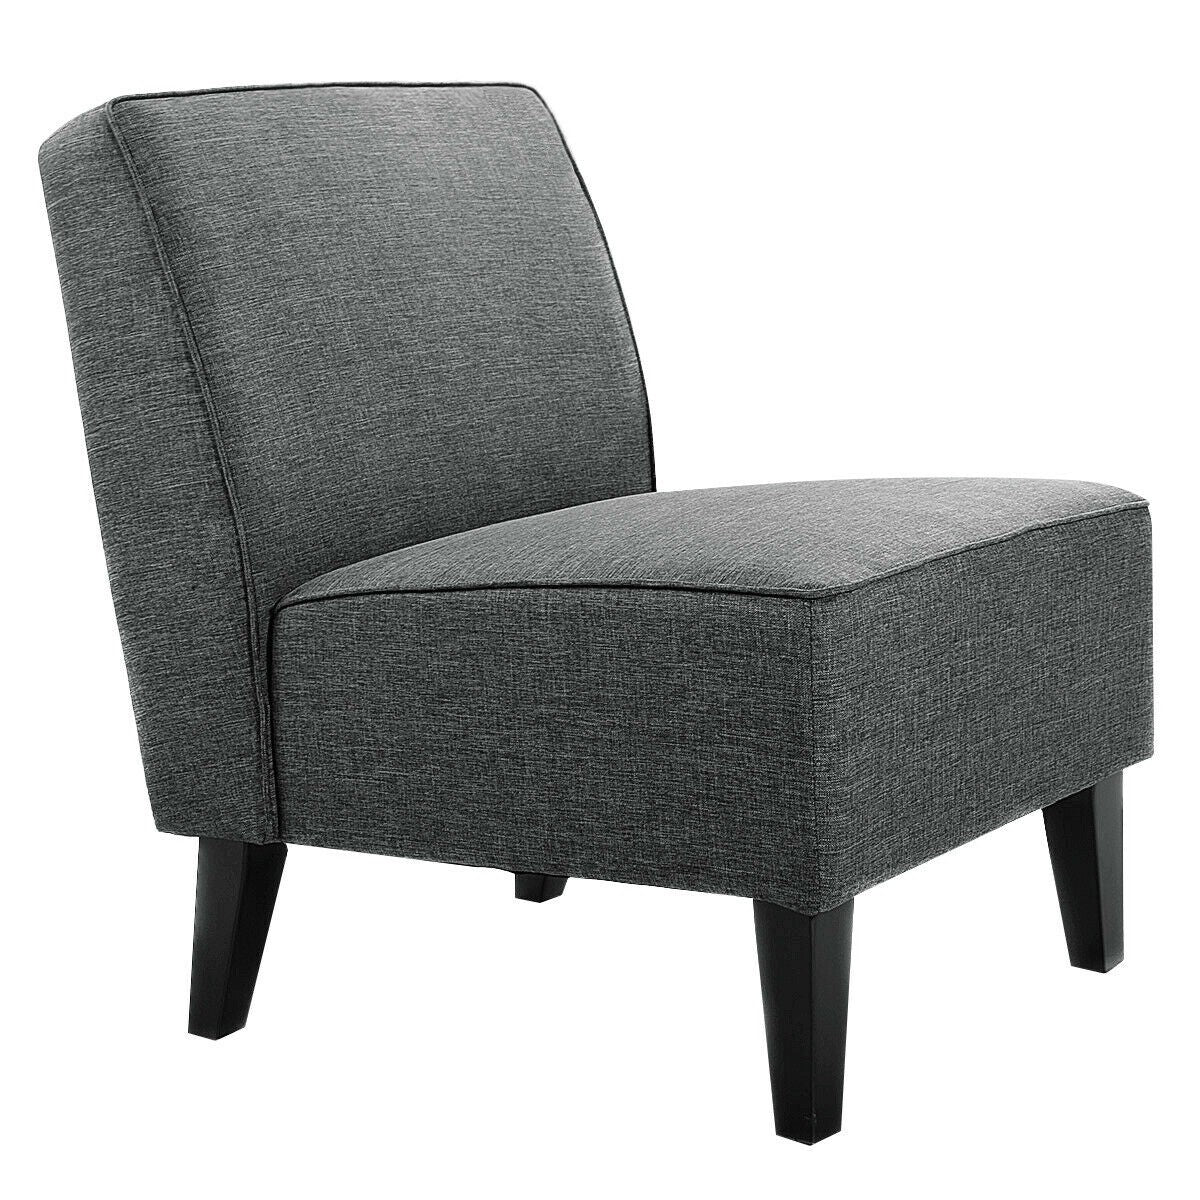 Thick Armless Accent Chair, Fabric Upholstered Slipper Chair - Giantexus